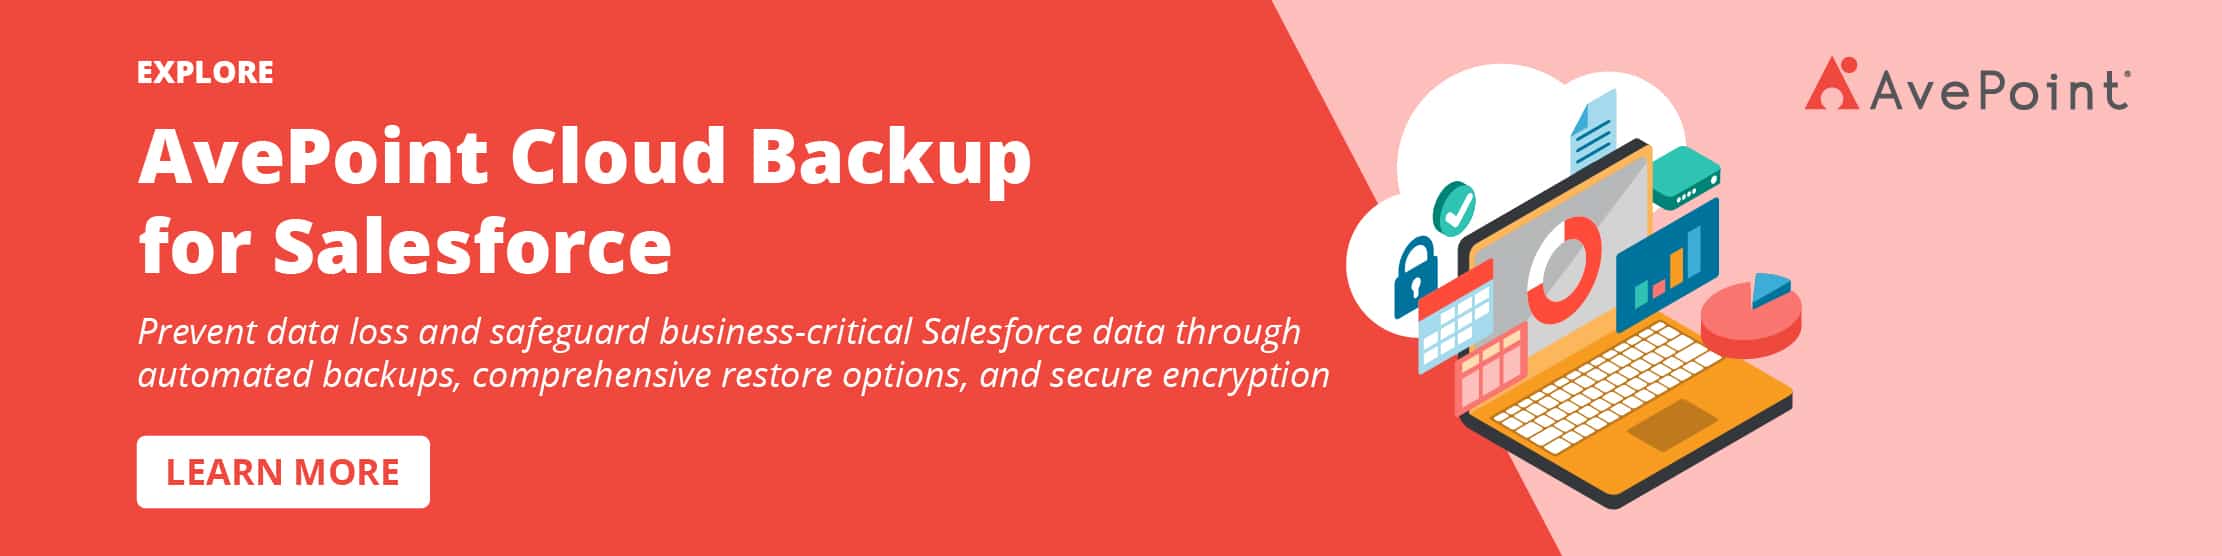 Learn more about AvePoint Cloud Backup for Salesforce